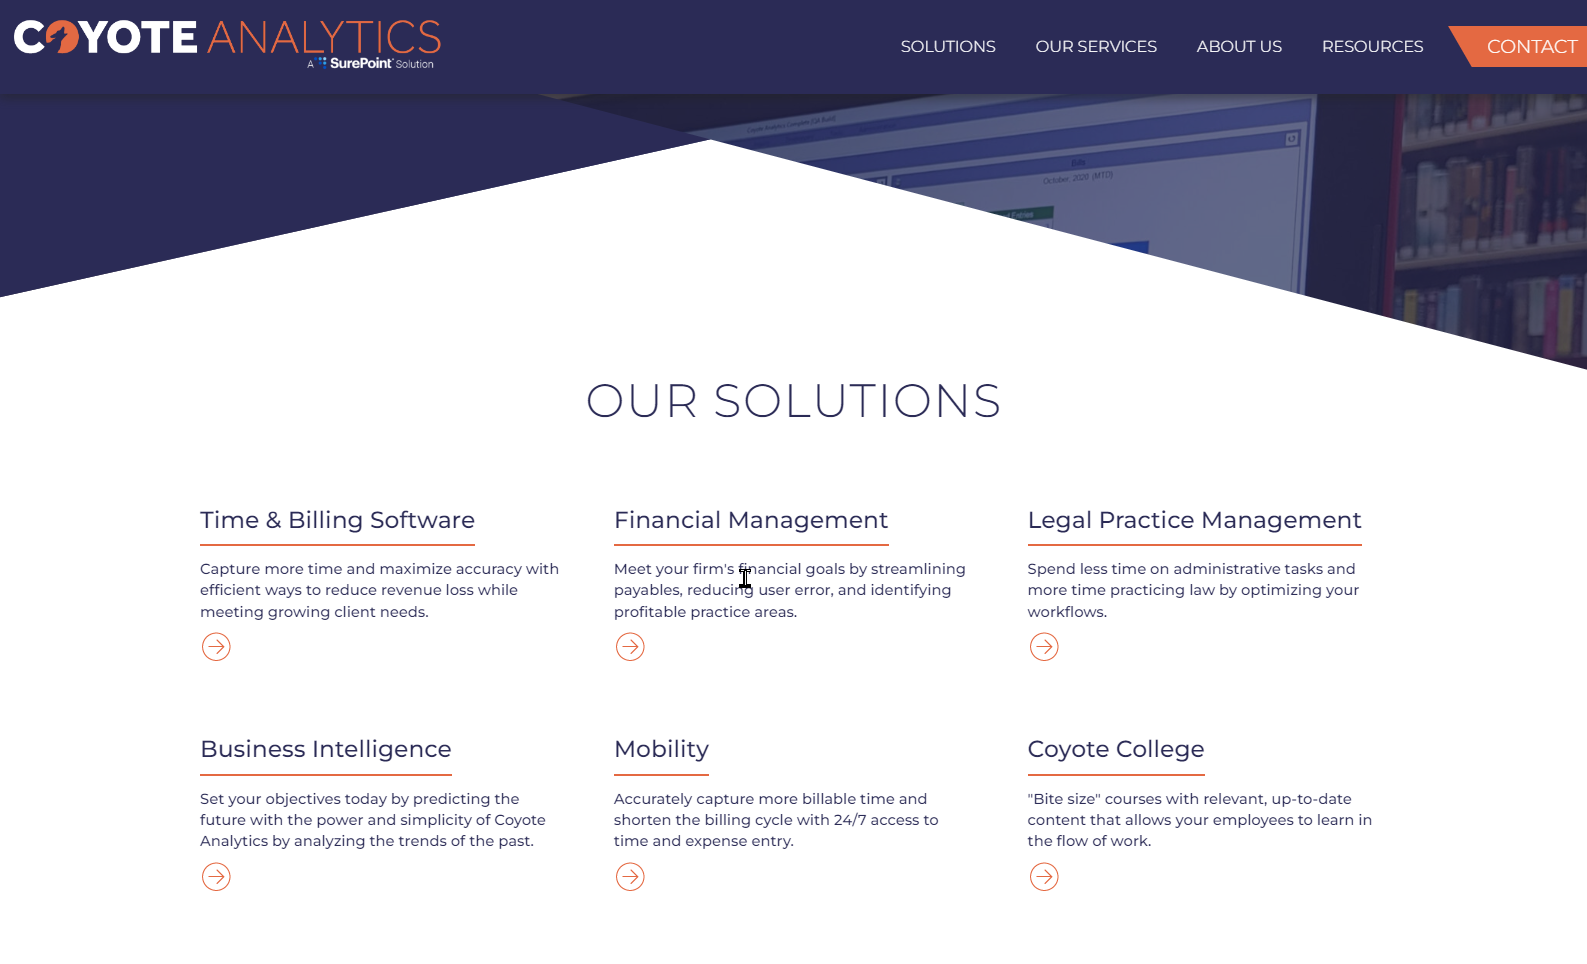 Coyote Analytics, A SurePoint Solution website